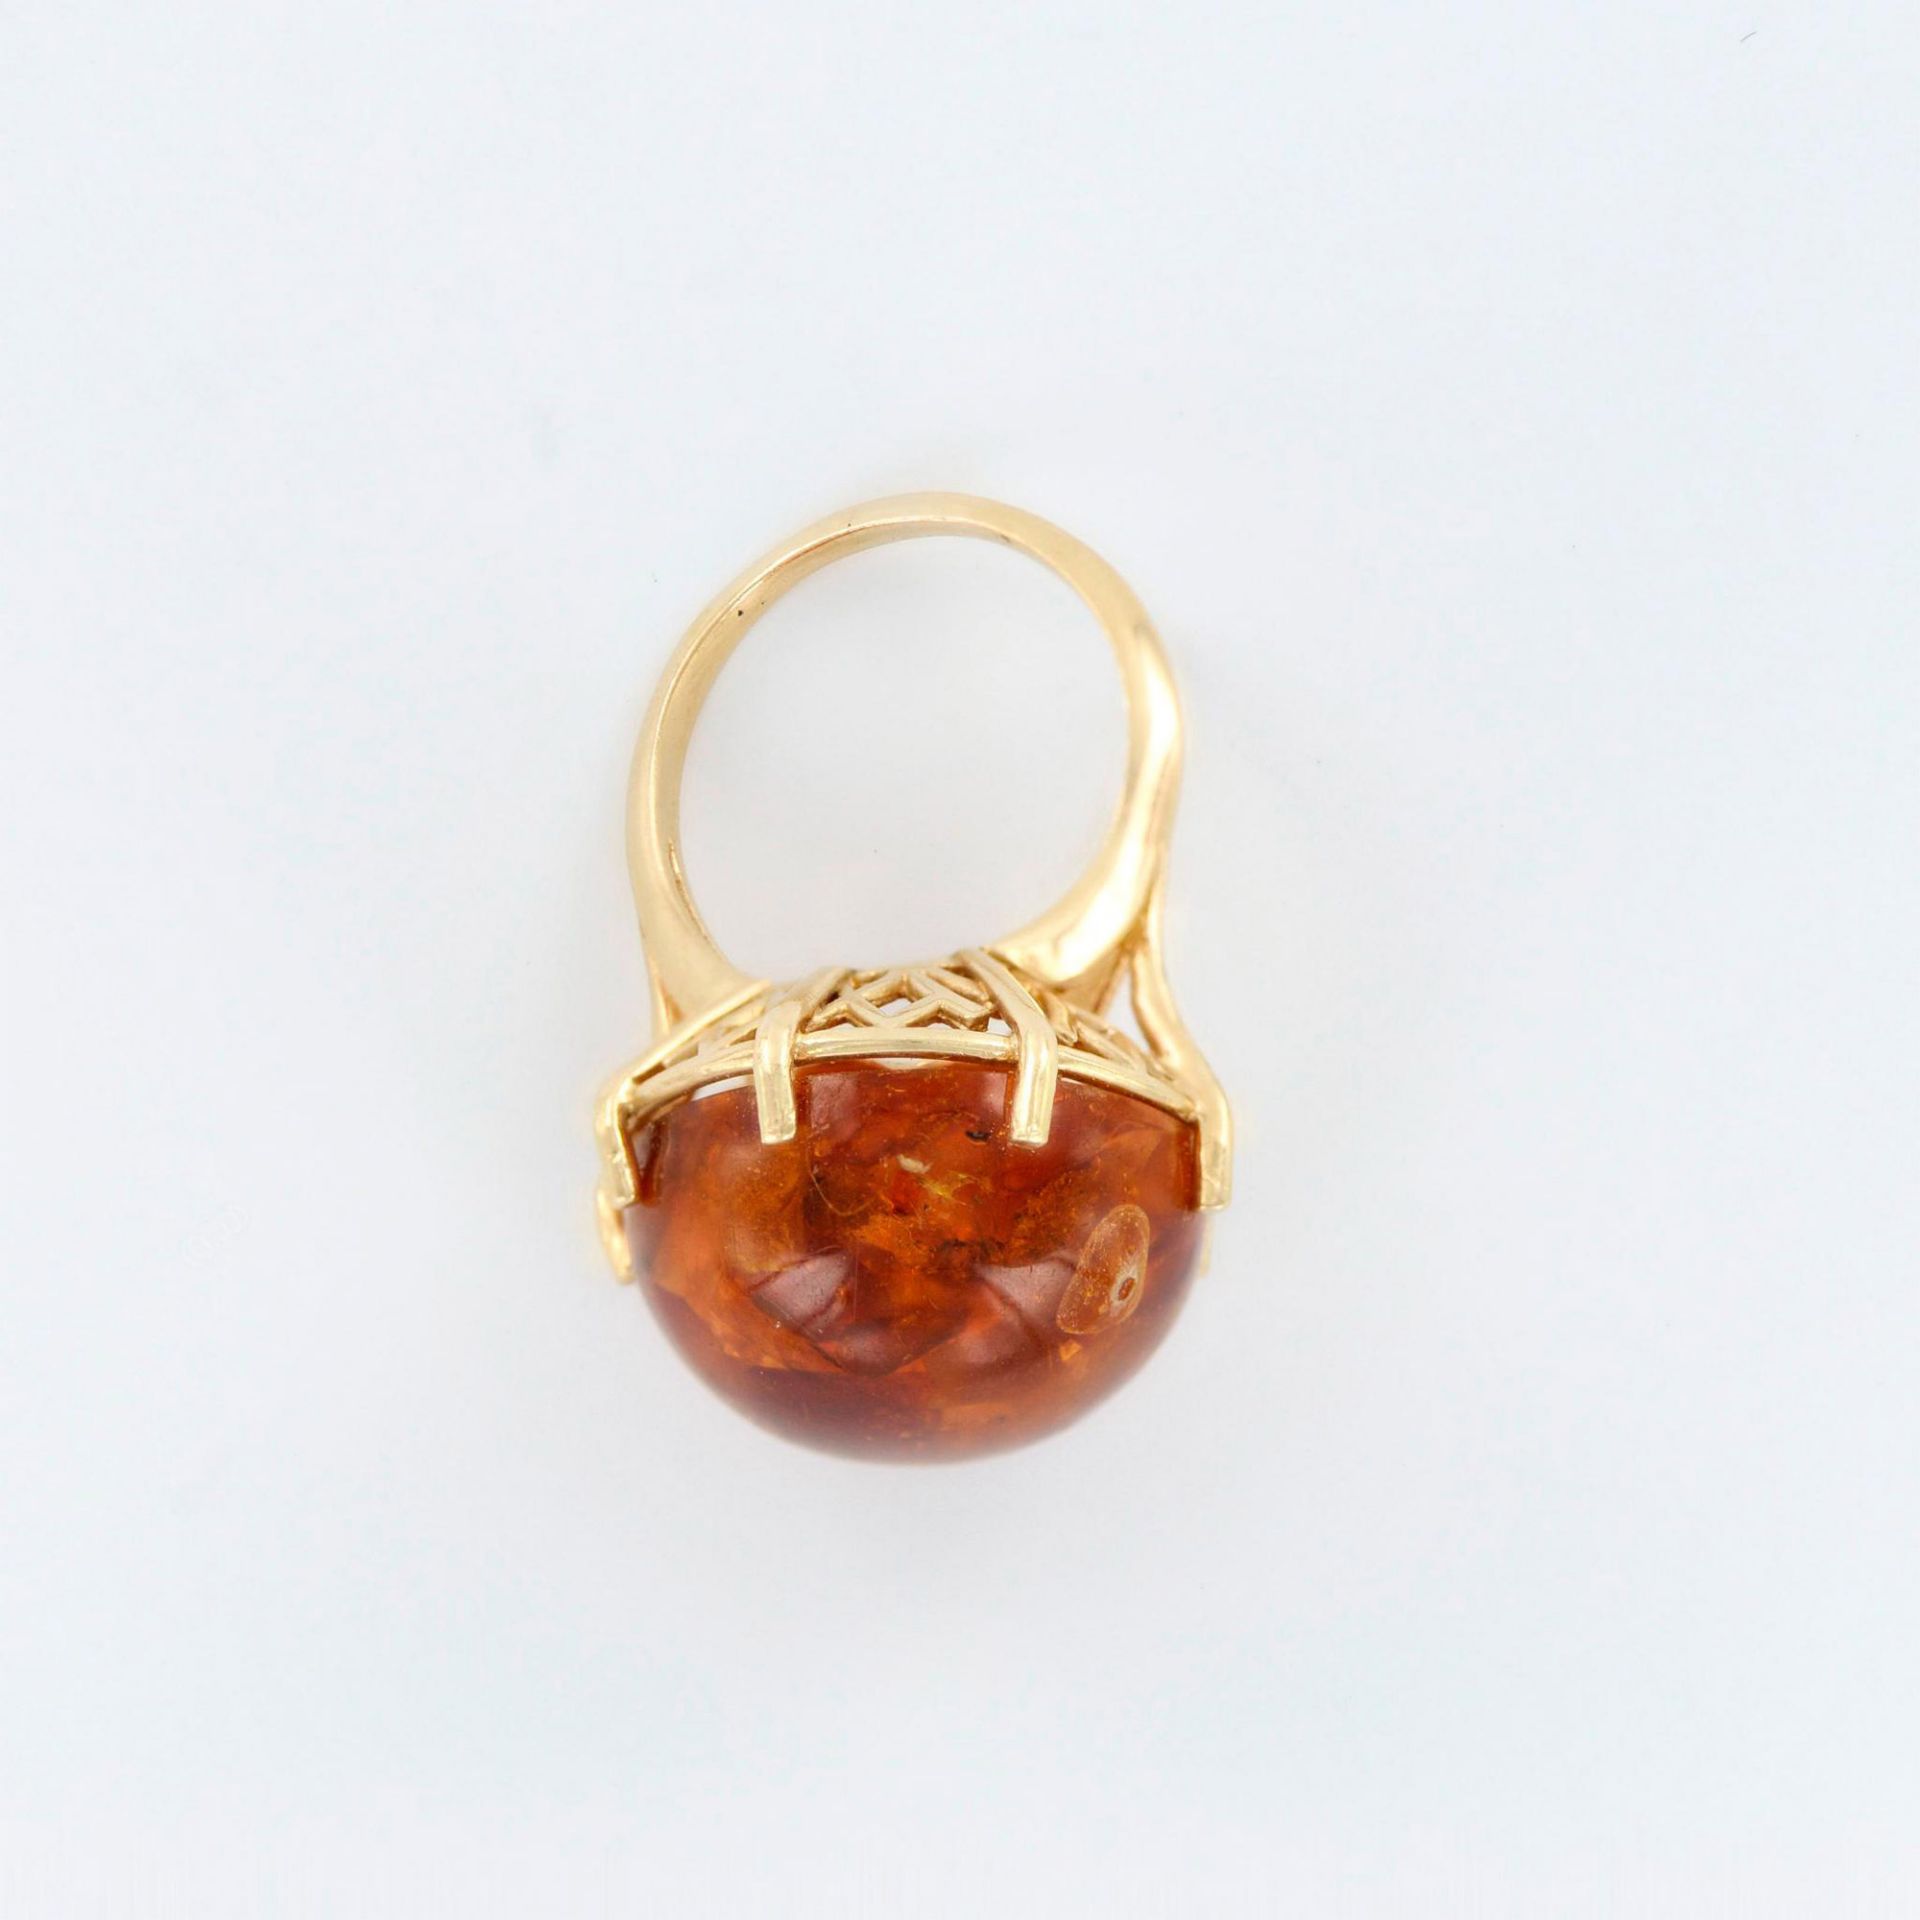 14K Yellow Gold and Amber Cocktail Ring - Image 4 of 6